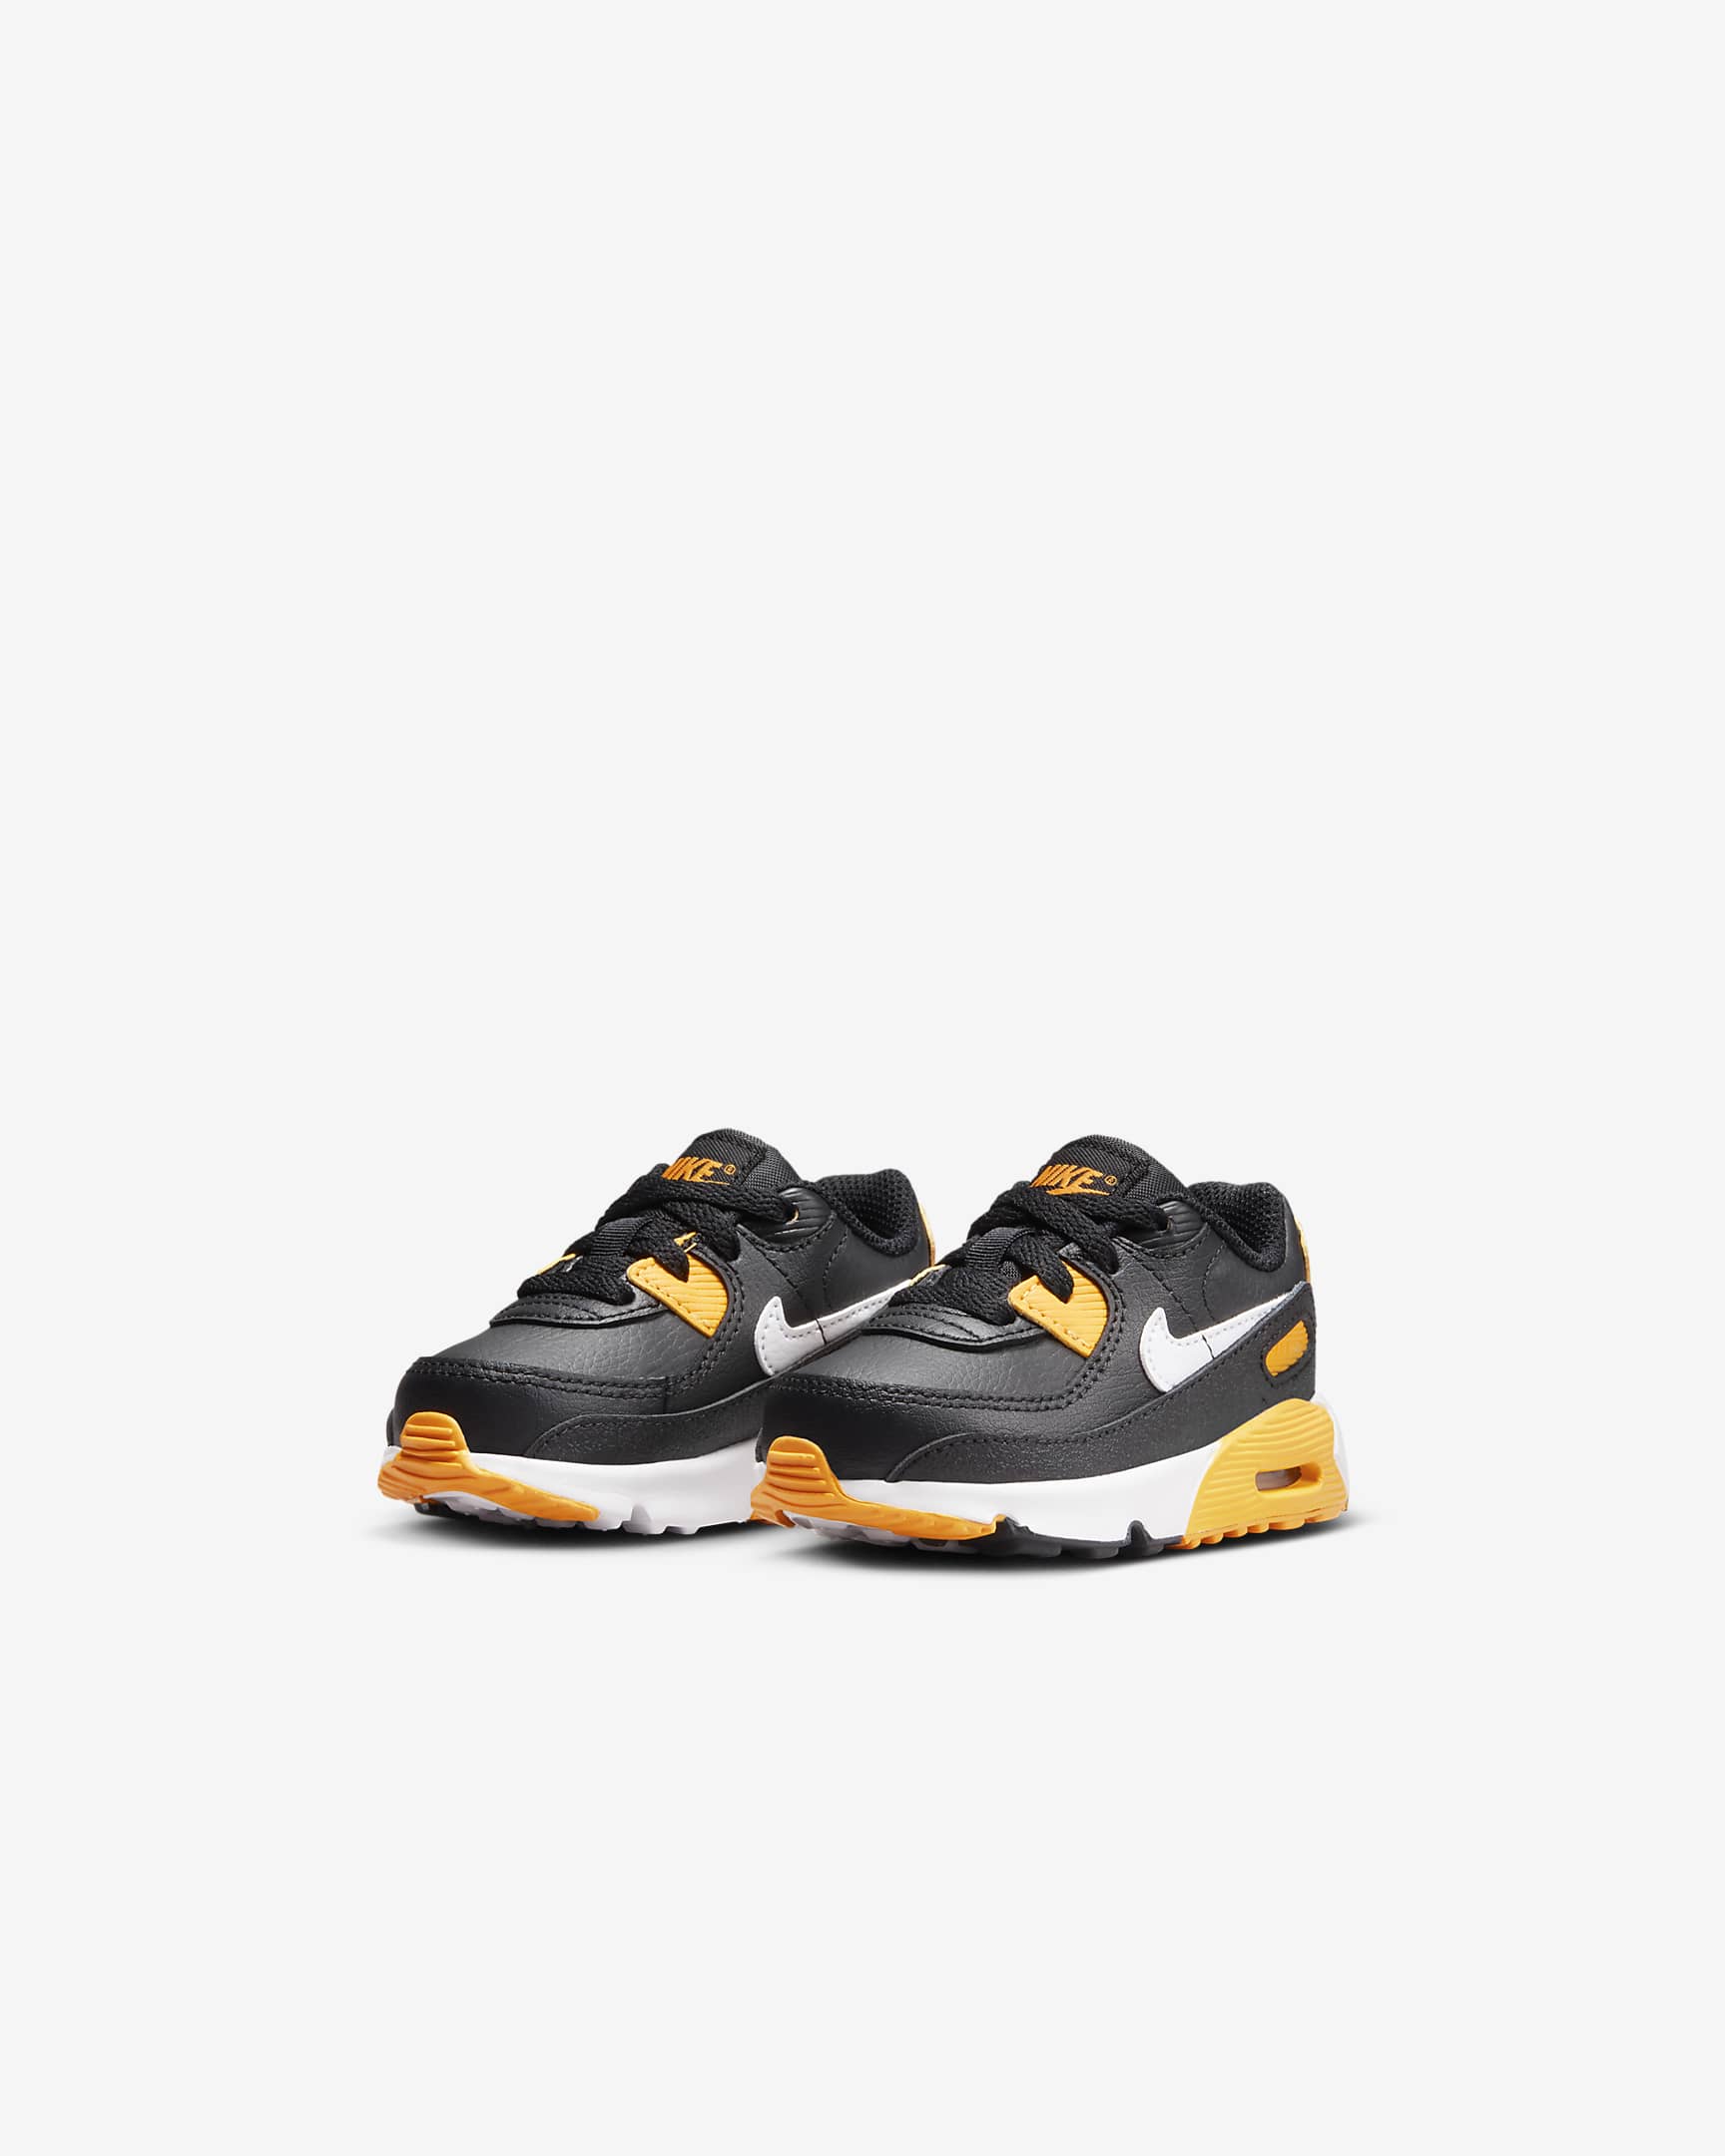 Nike Air Max 90 LTR Baby/Toddler Shoes - Black/University Gold/White